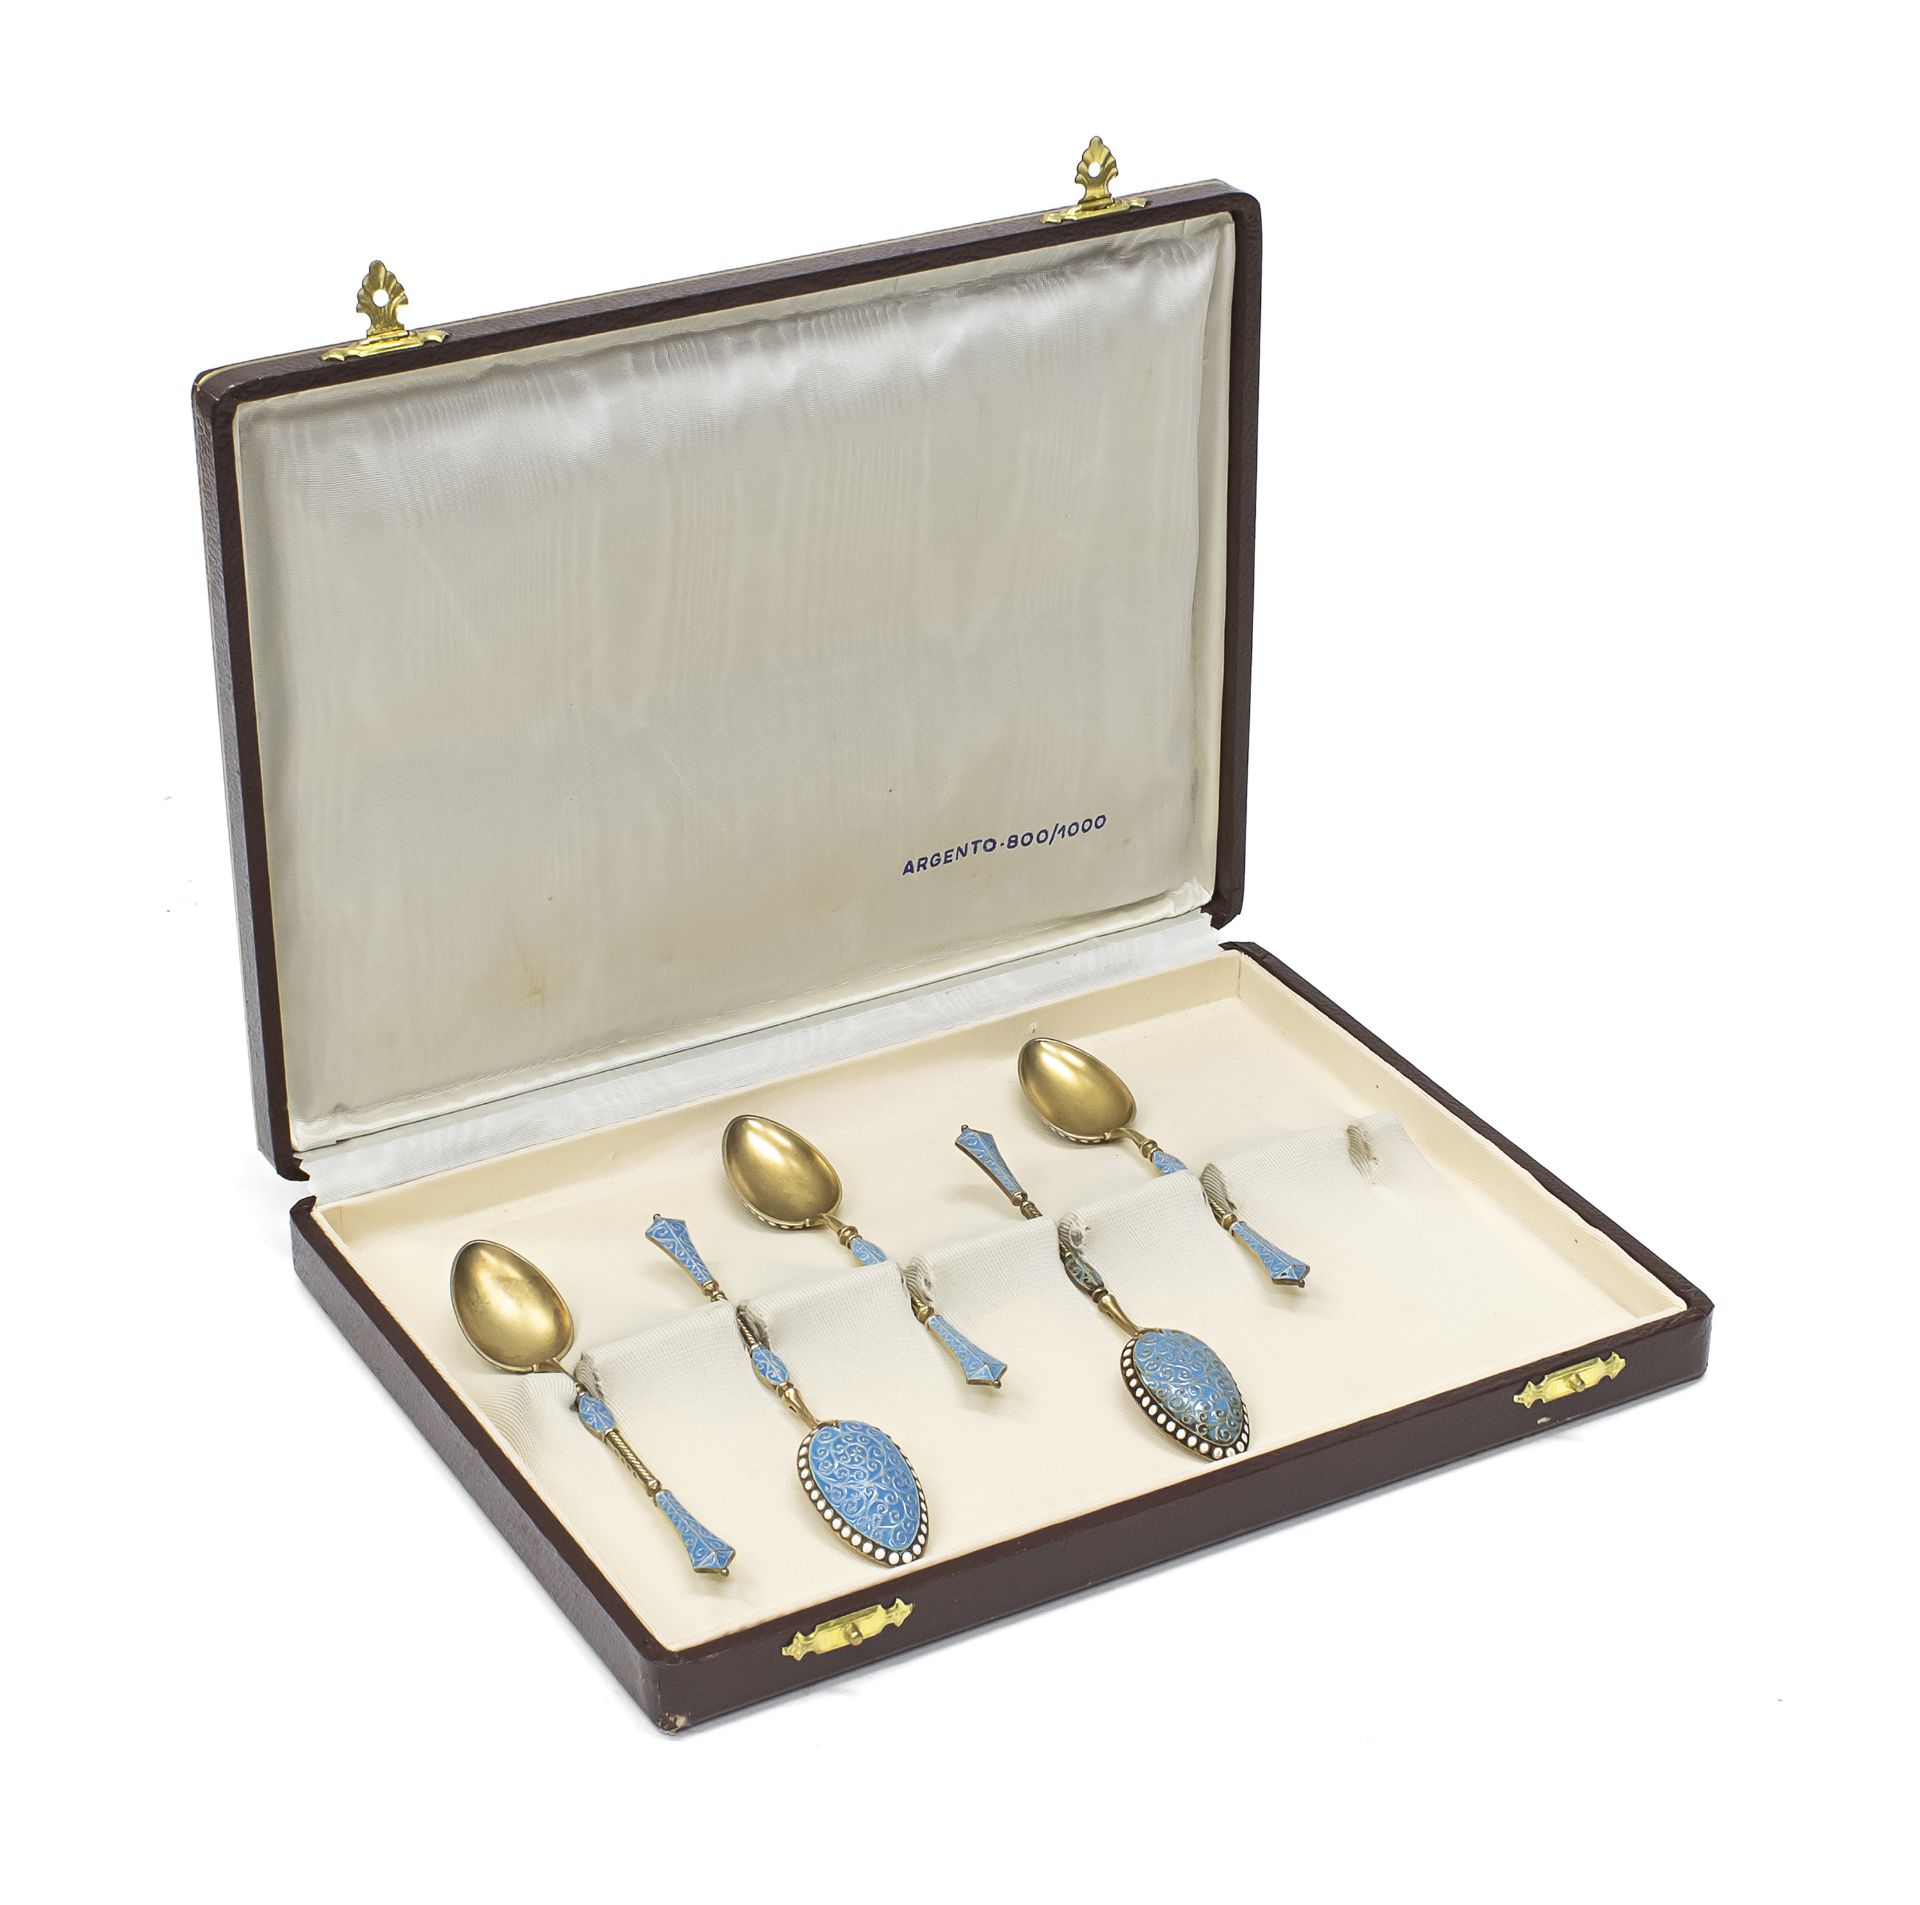 FIVE SPOONS IN GILDED SILVER AND ENAMEL NORWAY 19TH CENTURY